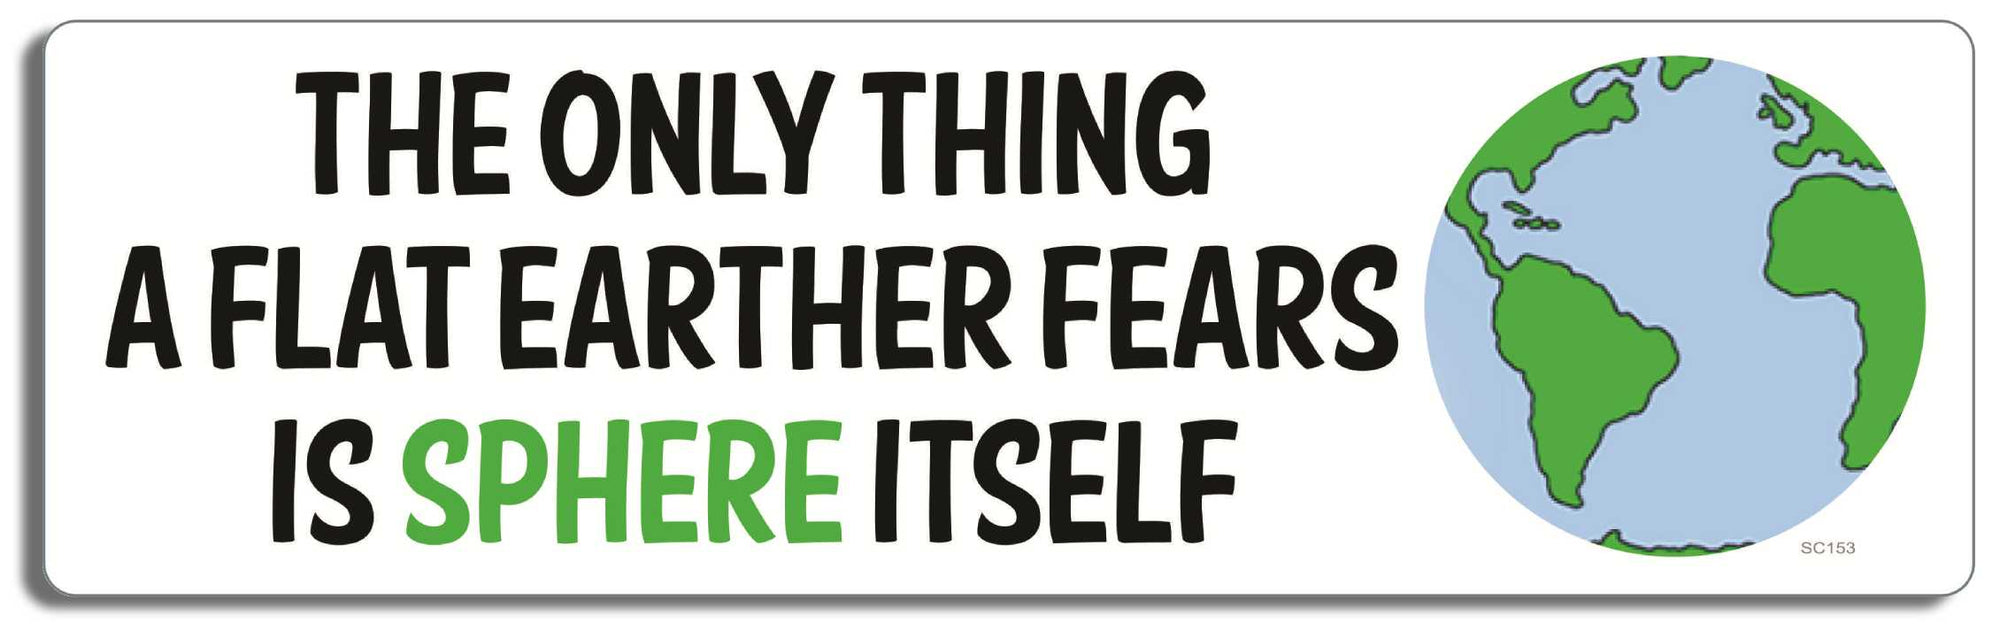 The only thing Flat Earthers fear, is sphere itself . -  3" x 10 -  Decal Bumper Sticker-political Bumper Sticker Car Magnet The only thing Flat Earthers fear-  Decal for carsconservative, liberal, Political